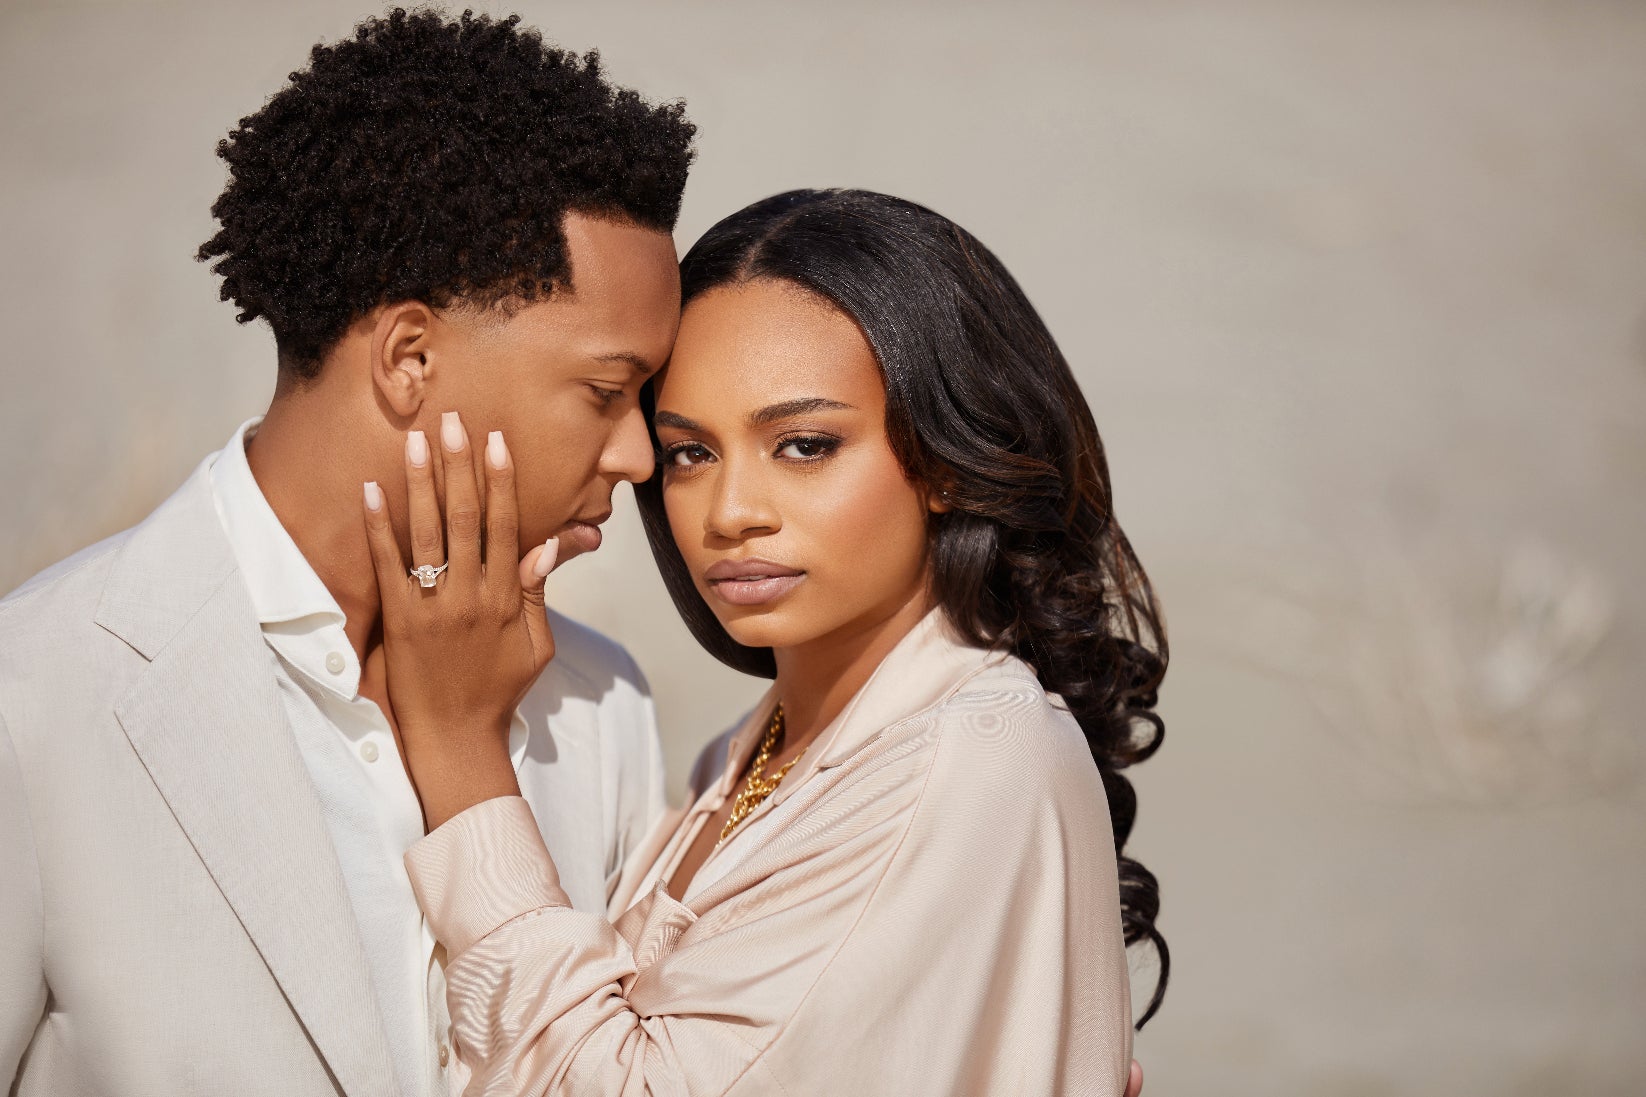 Vanessa Bell Calloway’s Daughter Announces Engagement With Gorgeous High Fashion Shoot In The Desert